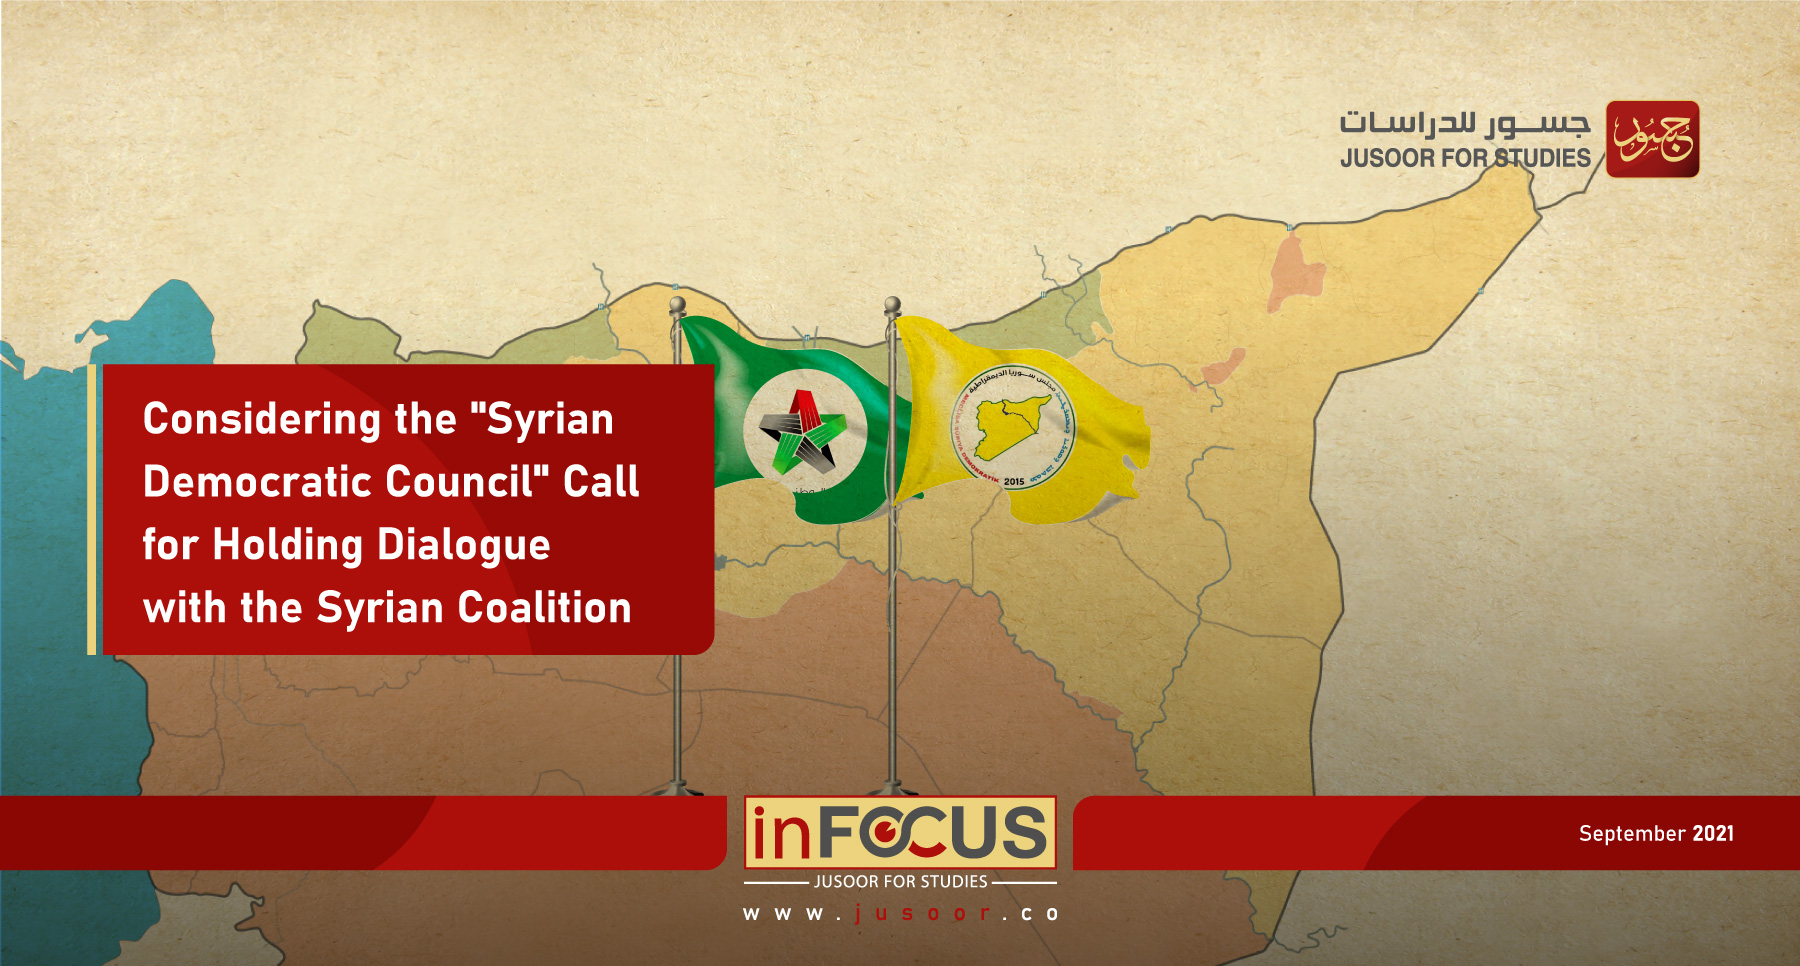 Considering the "Syrian Democratic Council" Call for Holding Dialogue with the Syrian Coalition